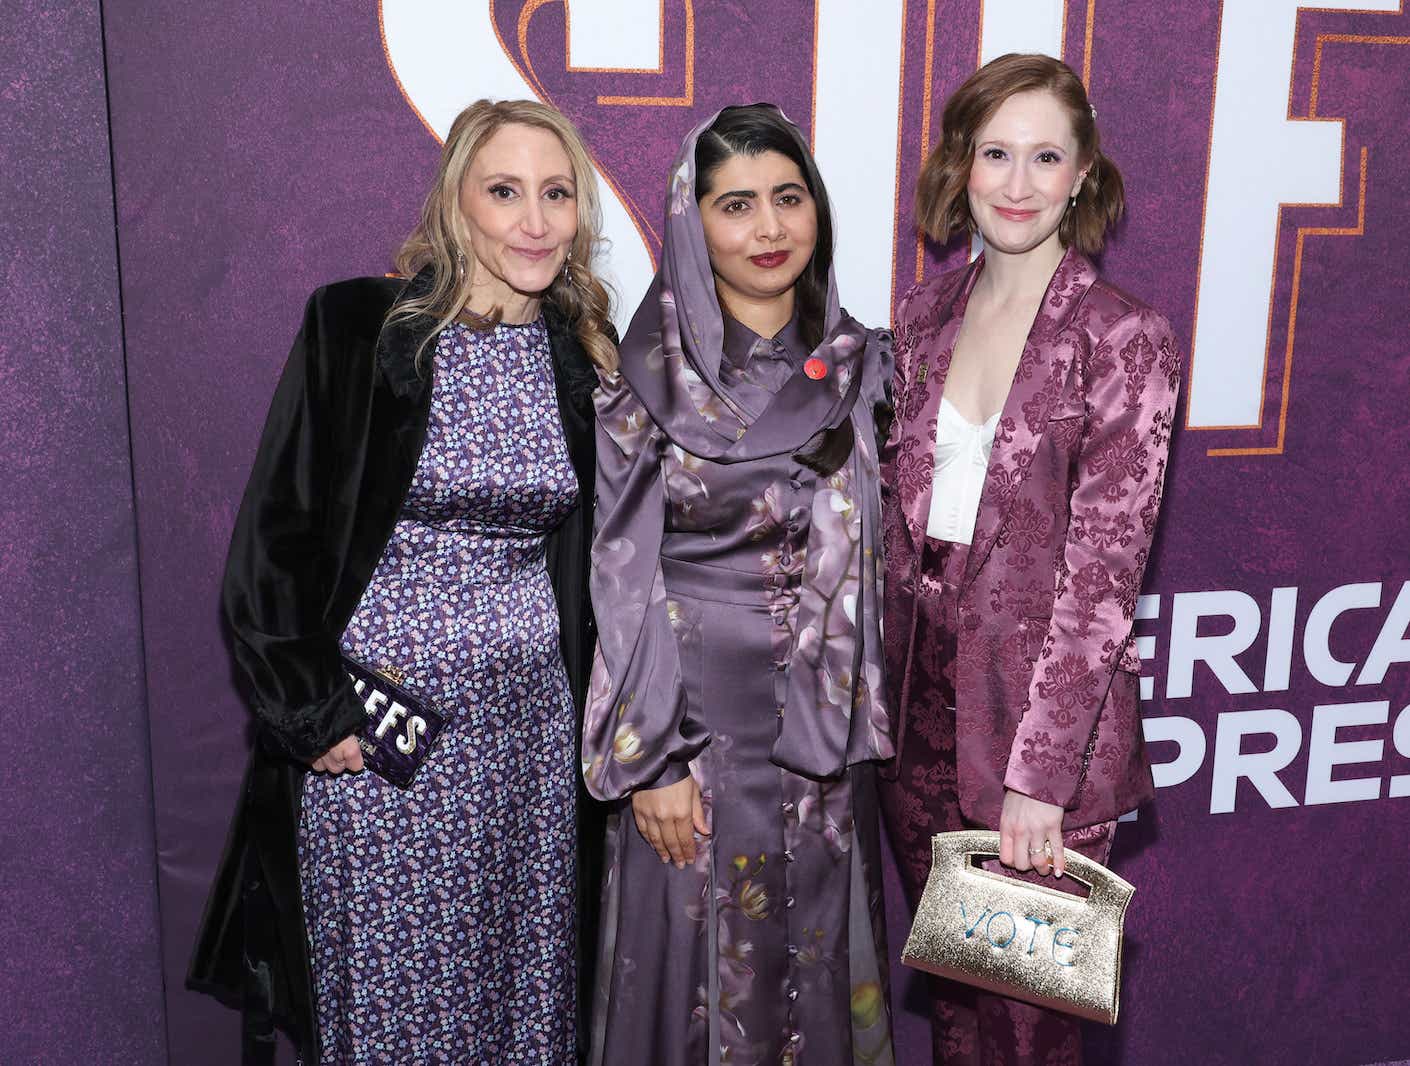 NEW YORK, NEW YORK - APRIL 18: (L-R) Jill Furman, Malala Yousafzai and Rebecca Sussman attend the "Suffs" Broadway Opening Night at Music Box Theatre on April 18, 2024 in New York City. (Photo by Cindy Ord/Getty Images)